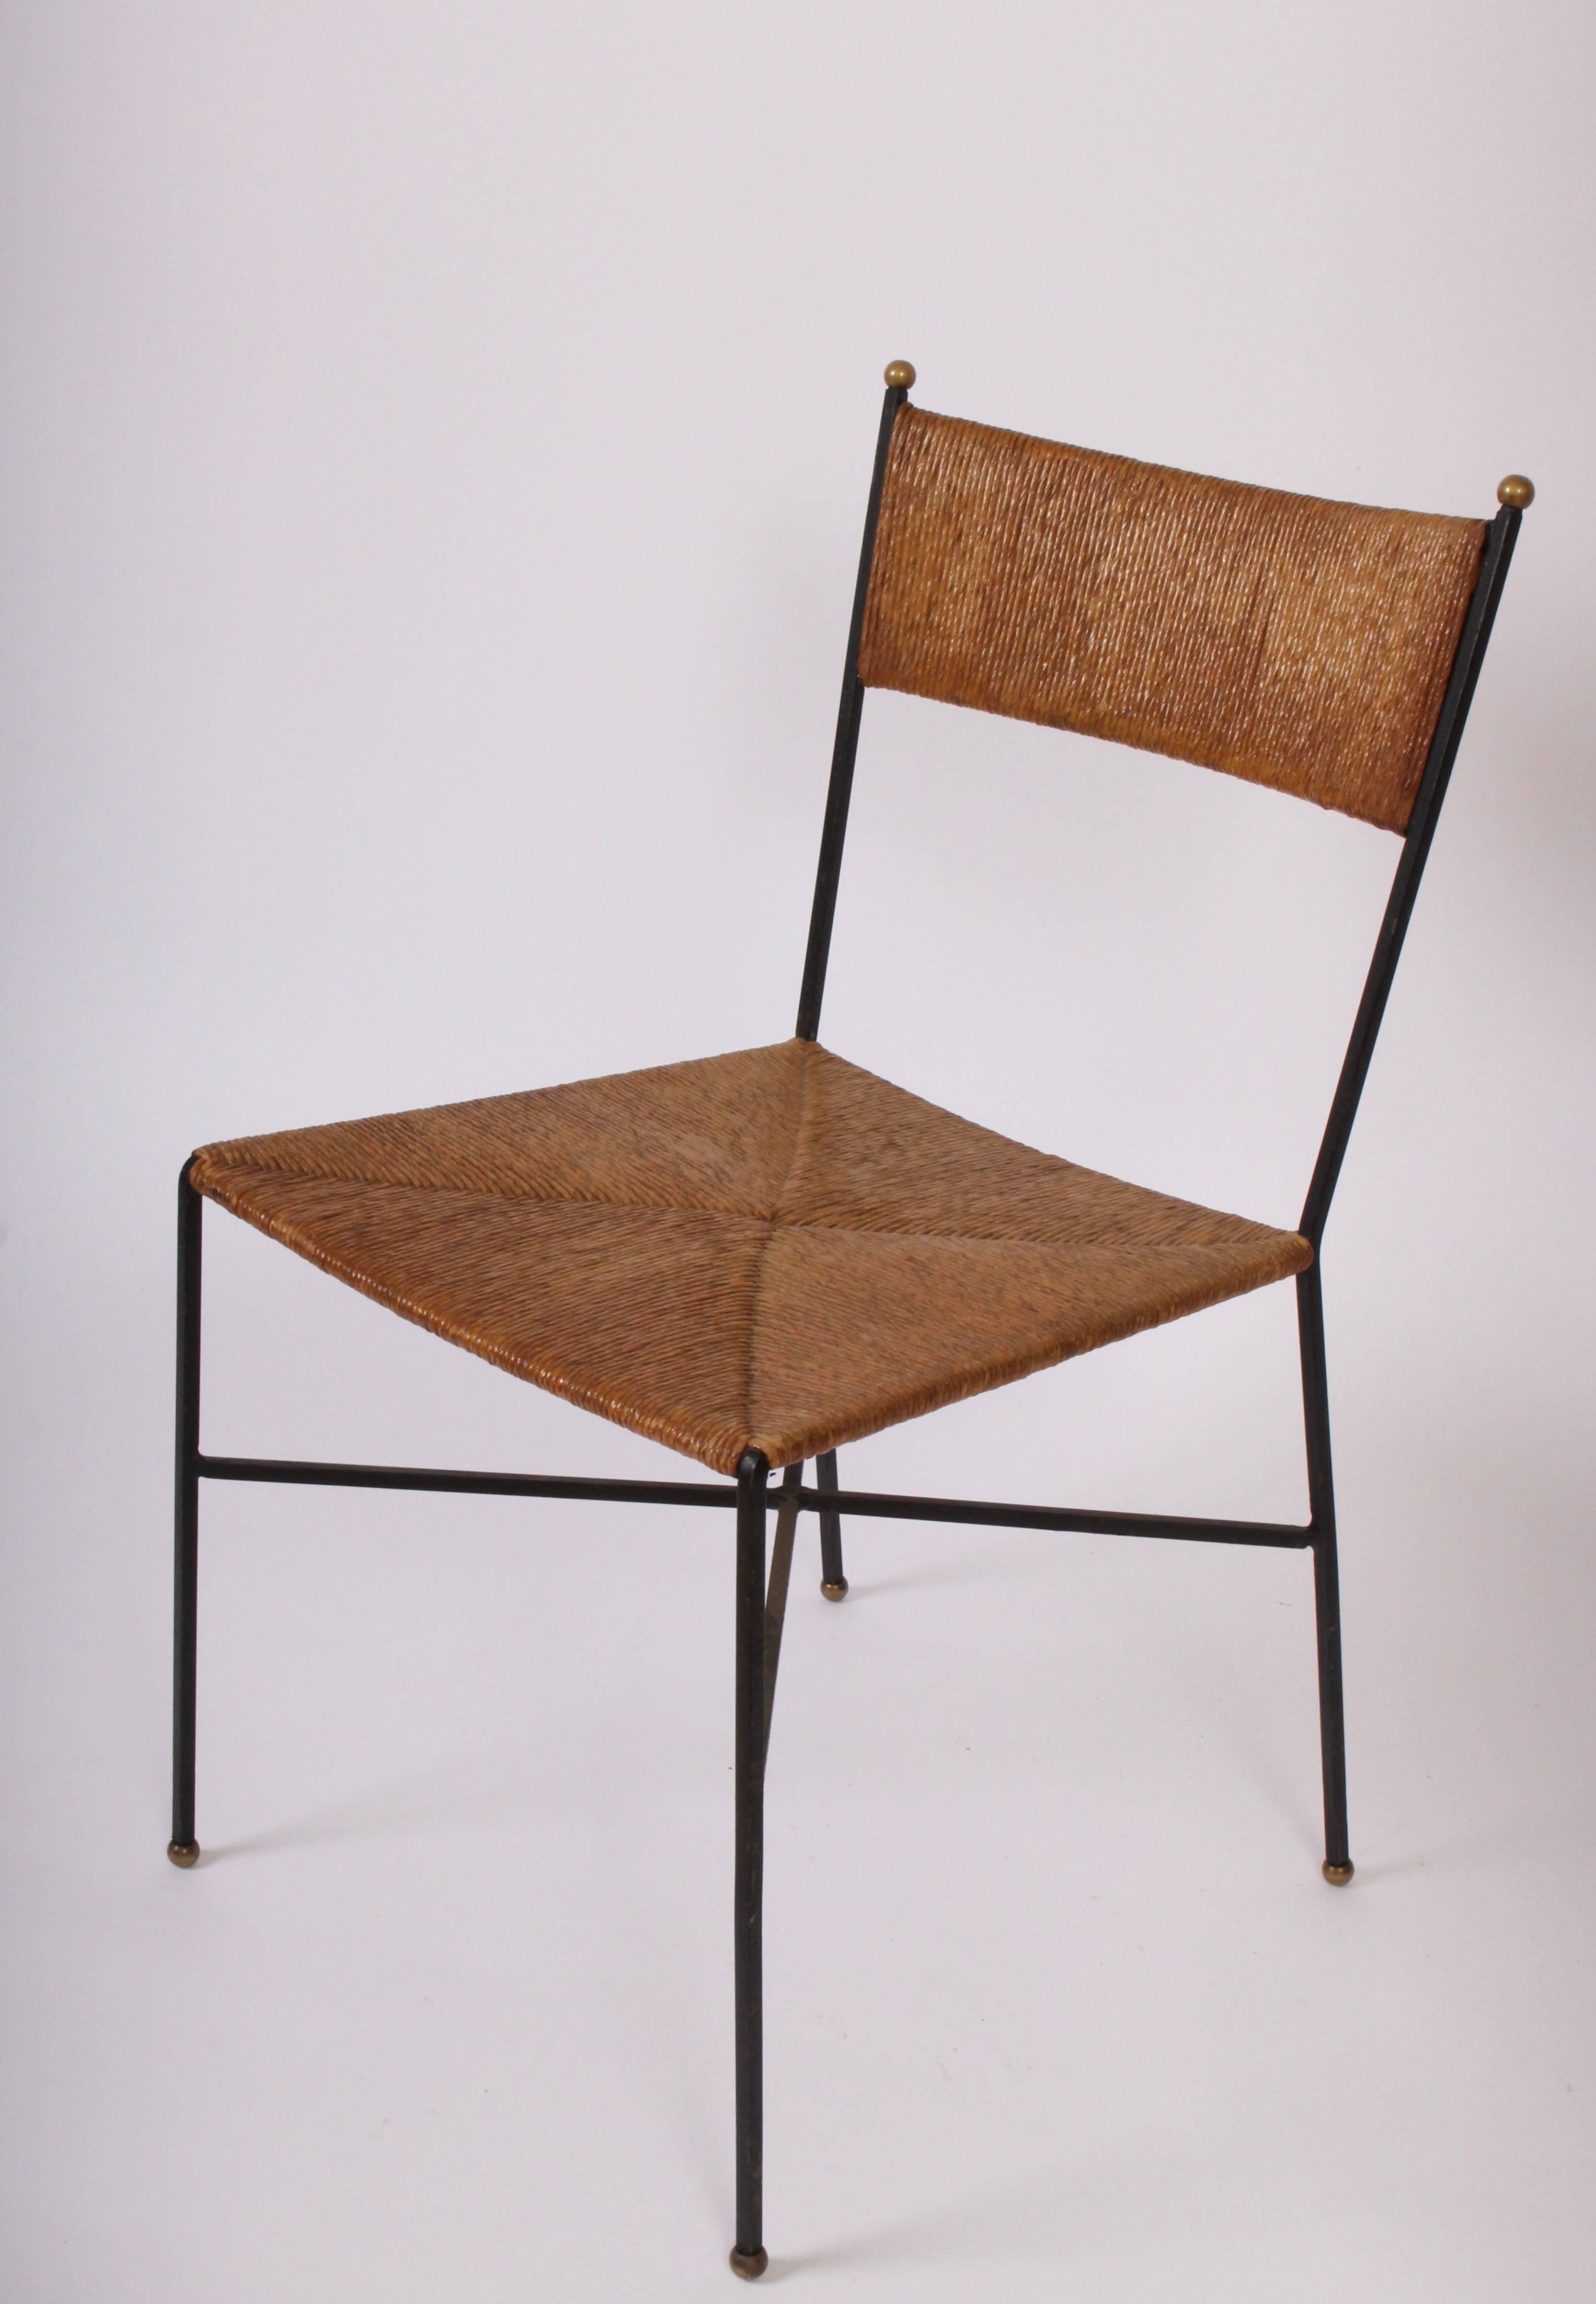 Milo Baughman for Murray Furniture wrought iron and rush side chair, circa 1954. Featuring a rounded rush back, rush seat, wrought iron frame with criss cross supports and brass ball details. Very good vintage condition. Comfortable. Versatile.